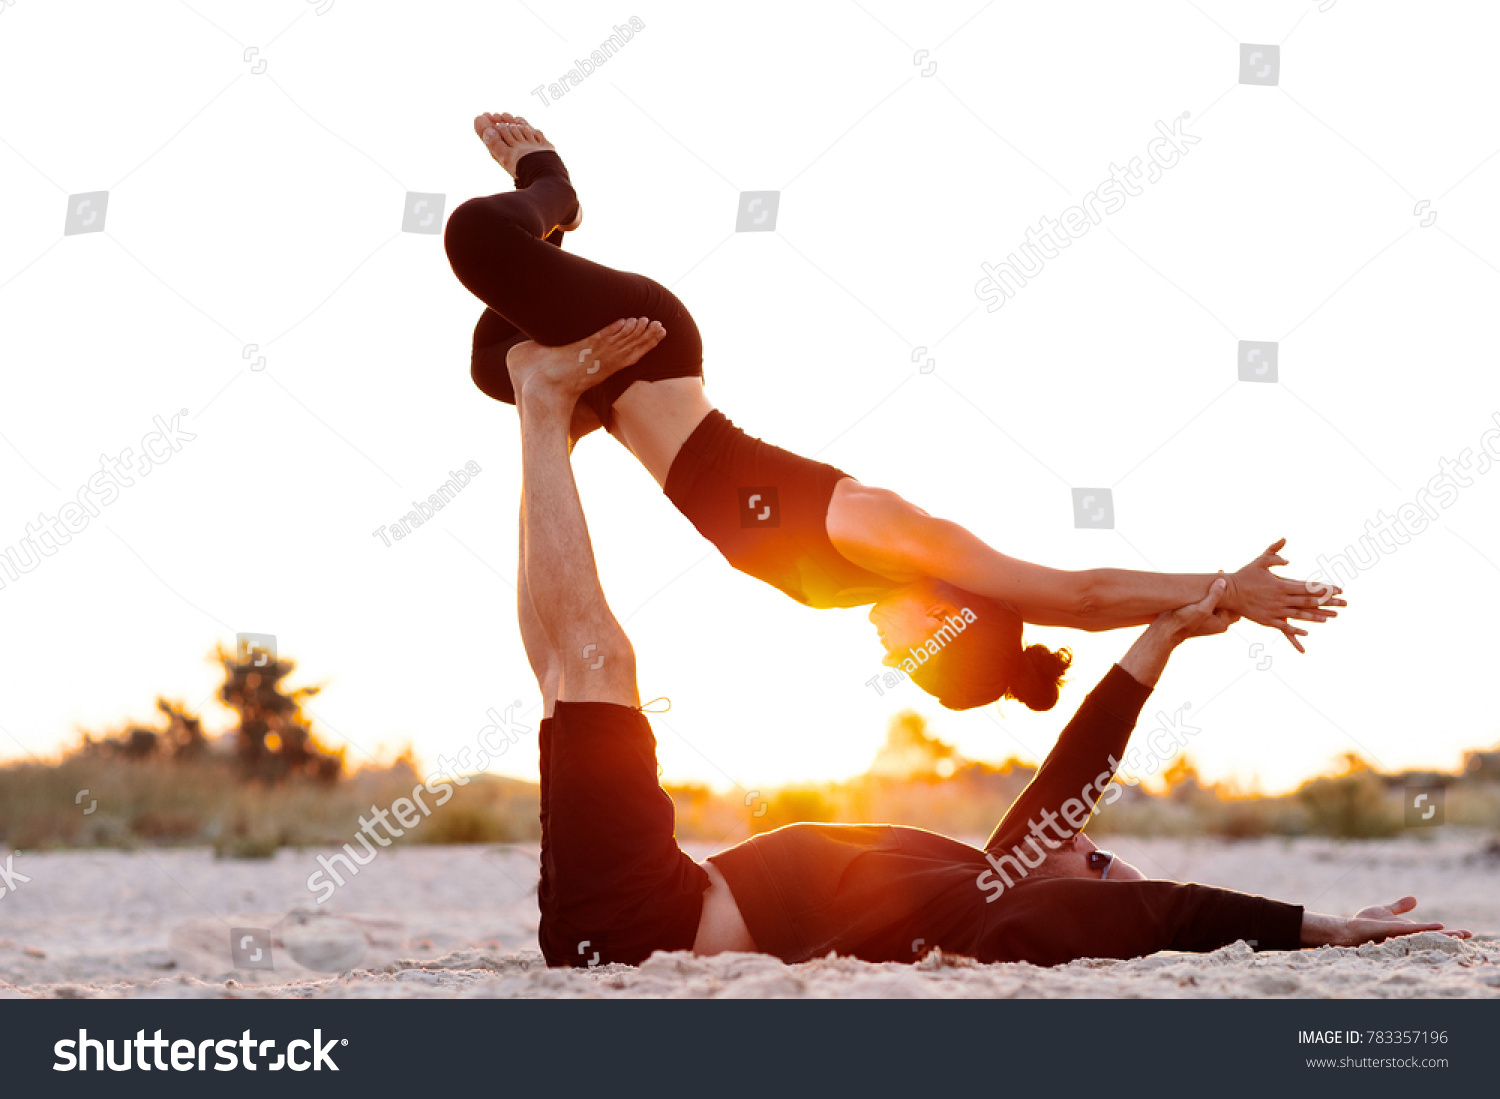 man and woman doing acrobatic yoga early in the morning #783357196